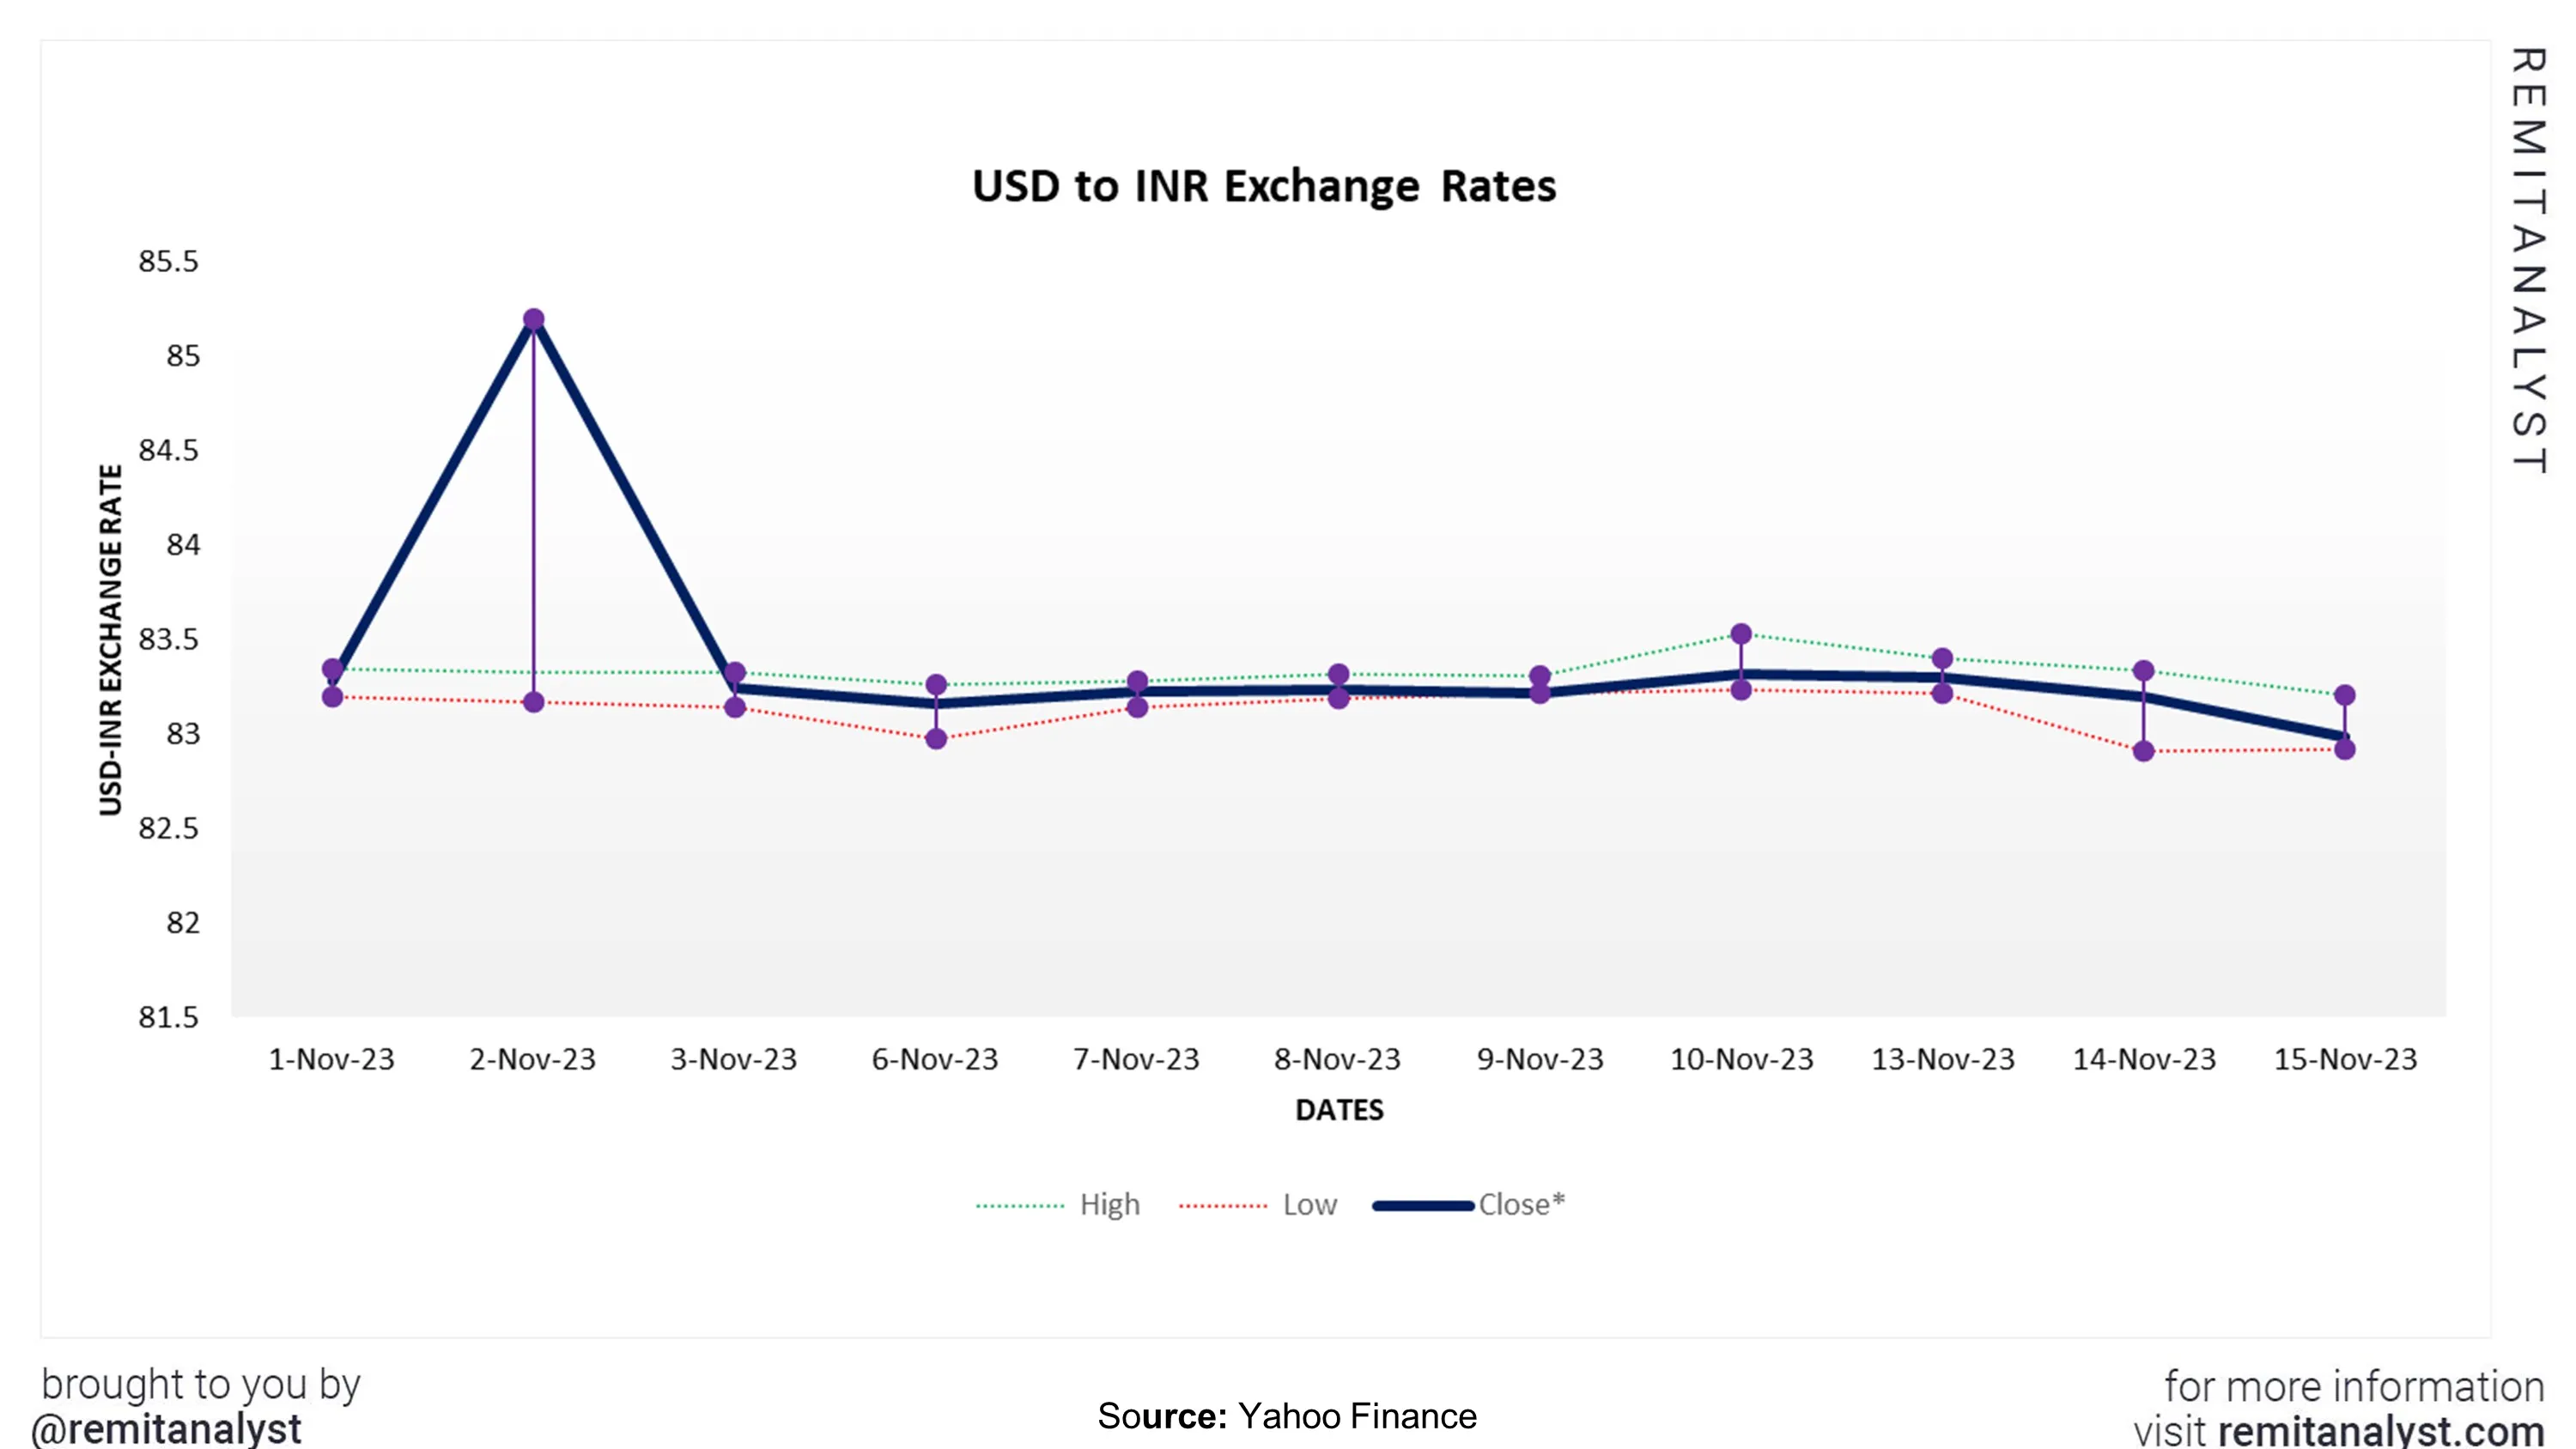 usd-to-inr-exchange-rate-from-1-nov-2023-to-15-nov-2023